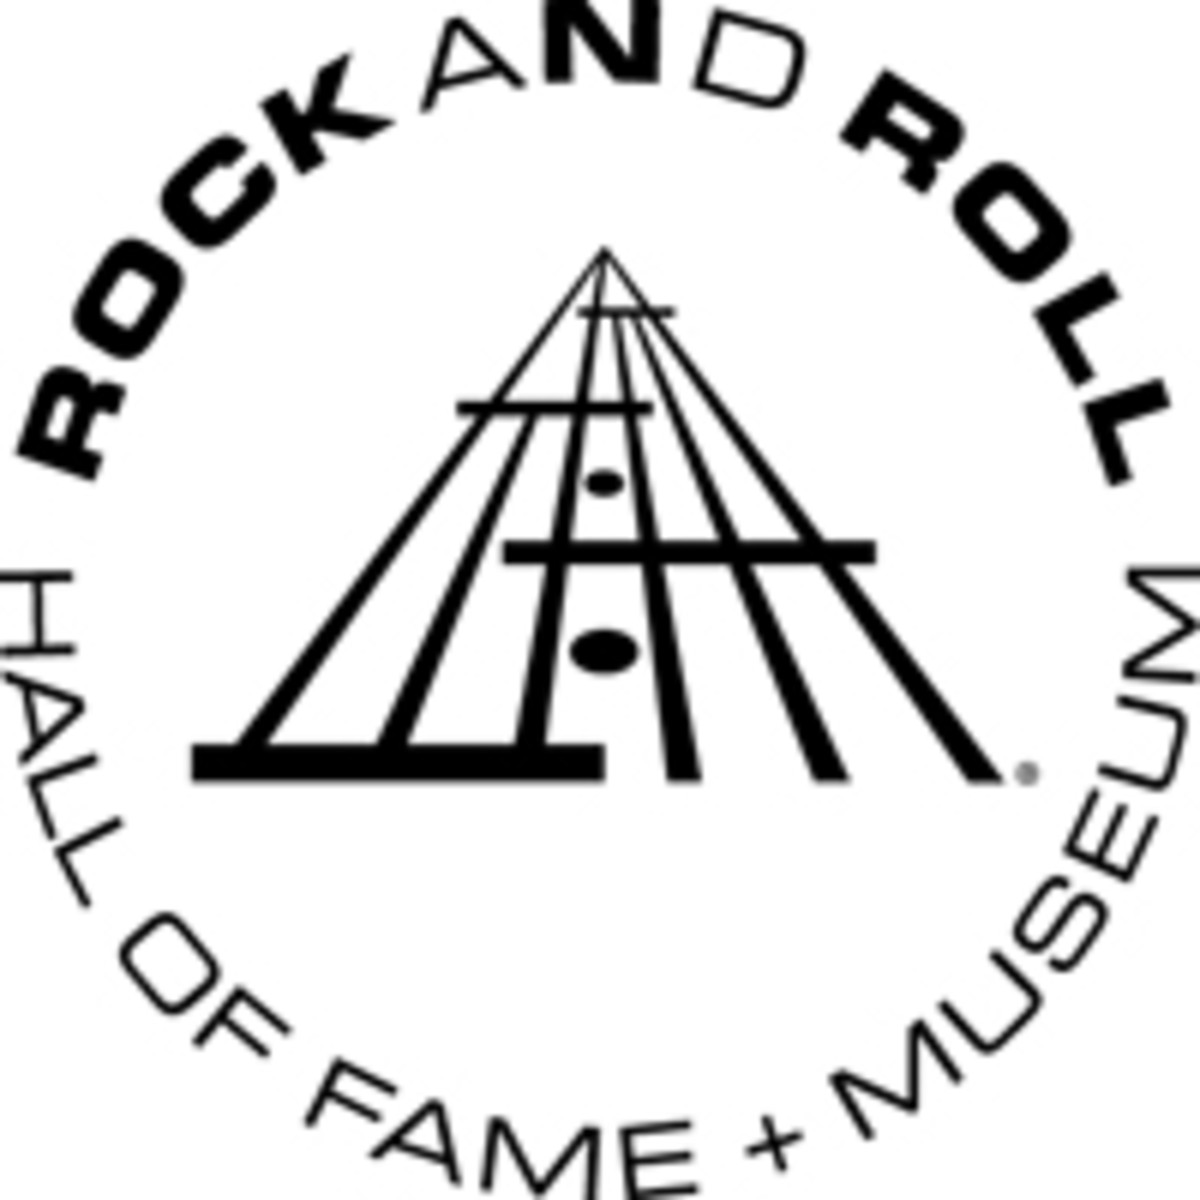 Rock And Roll Hall of Fame and Museum